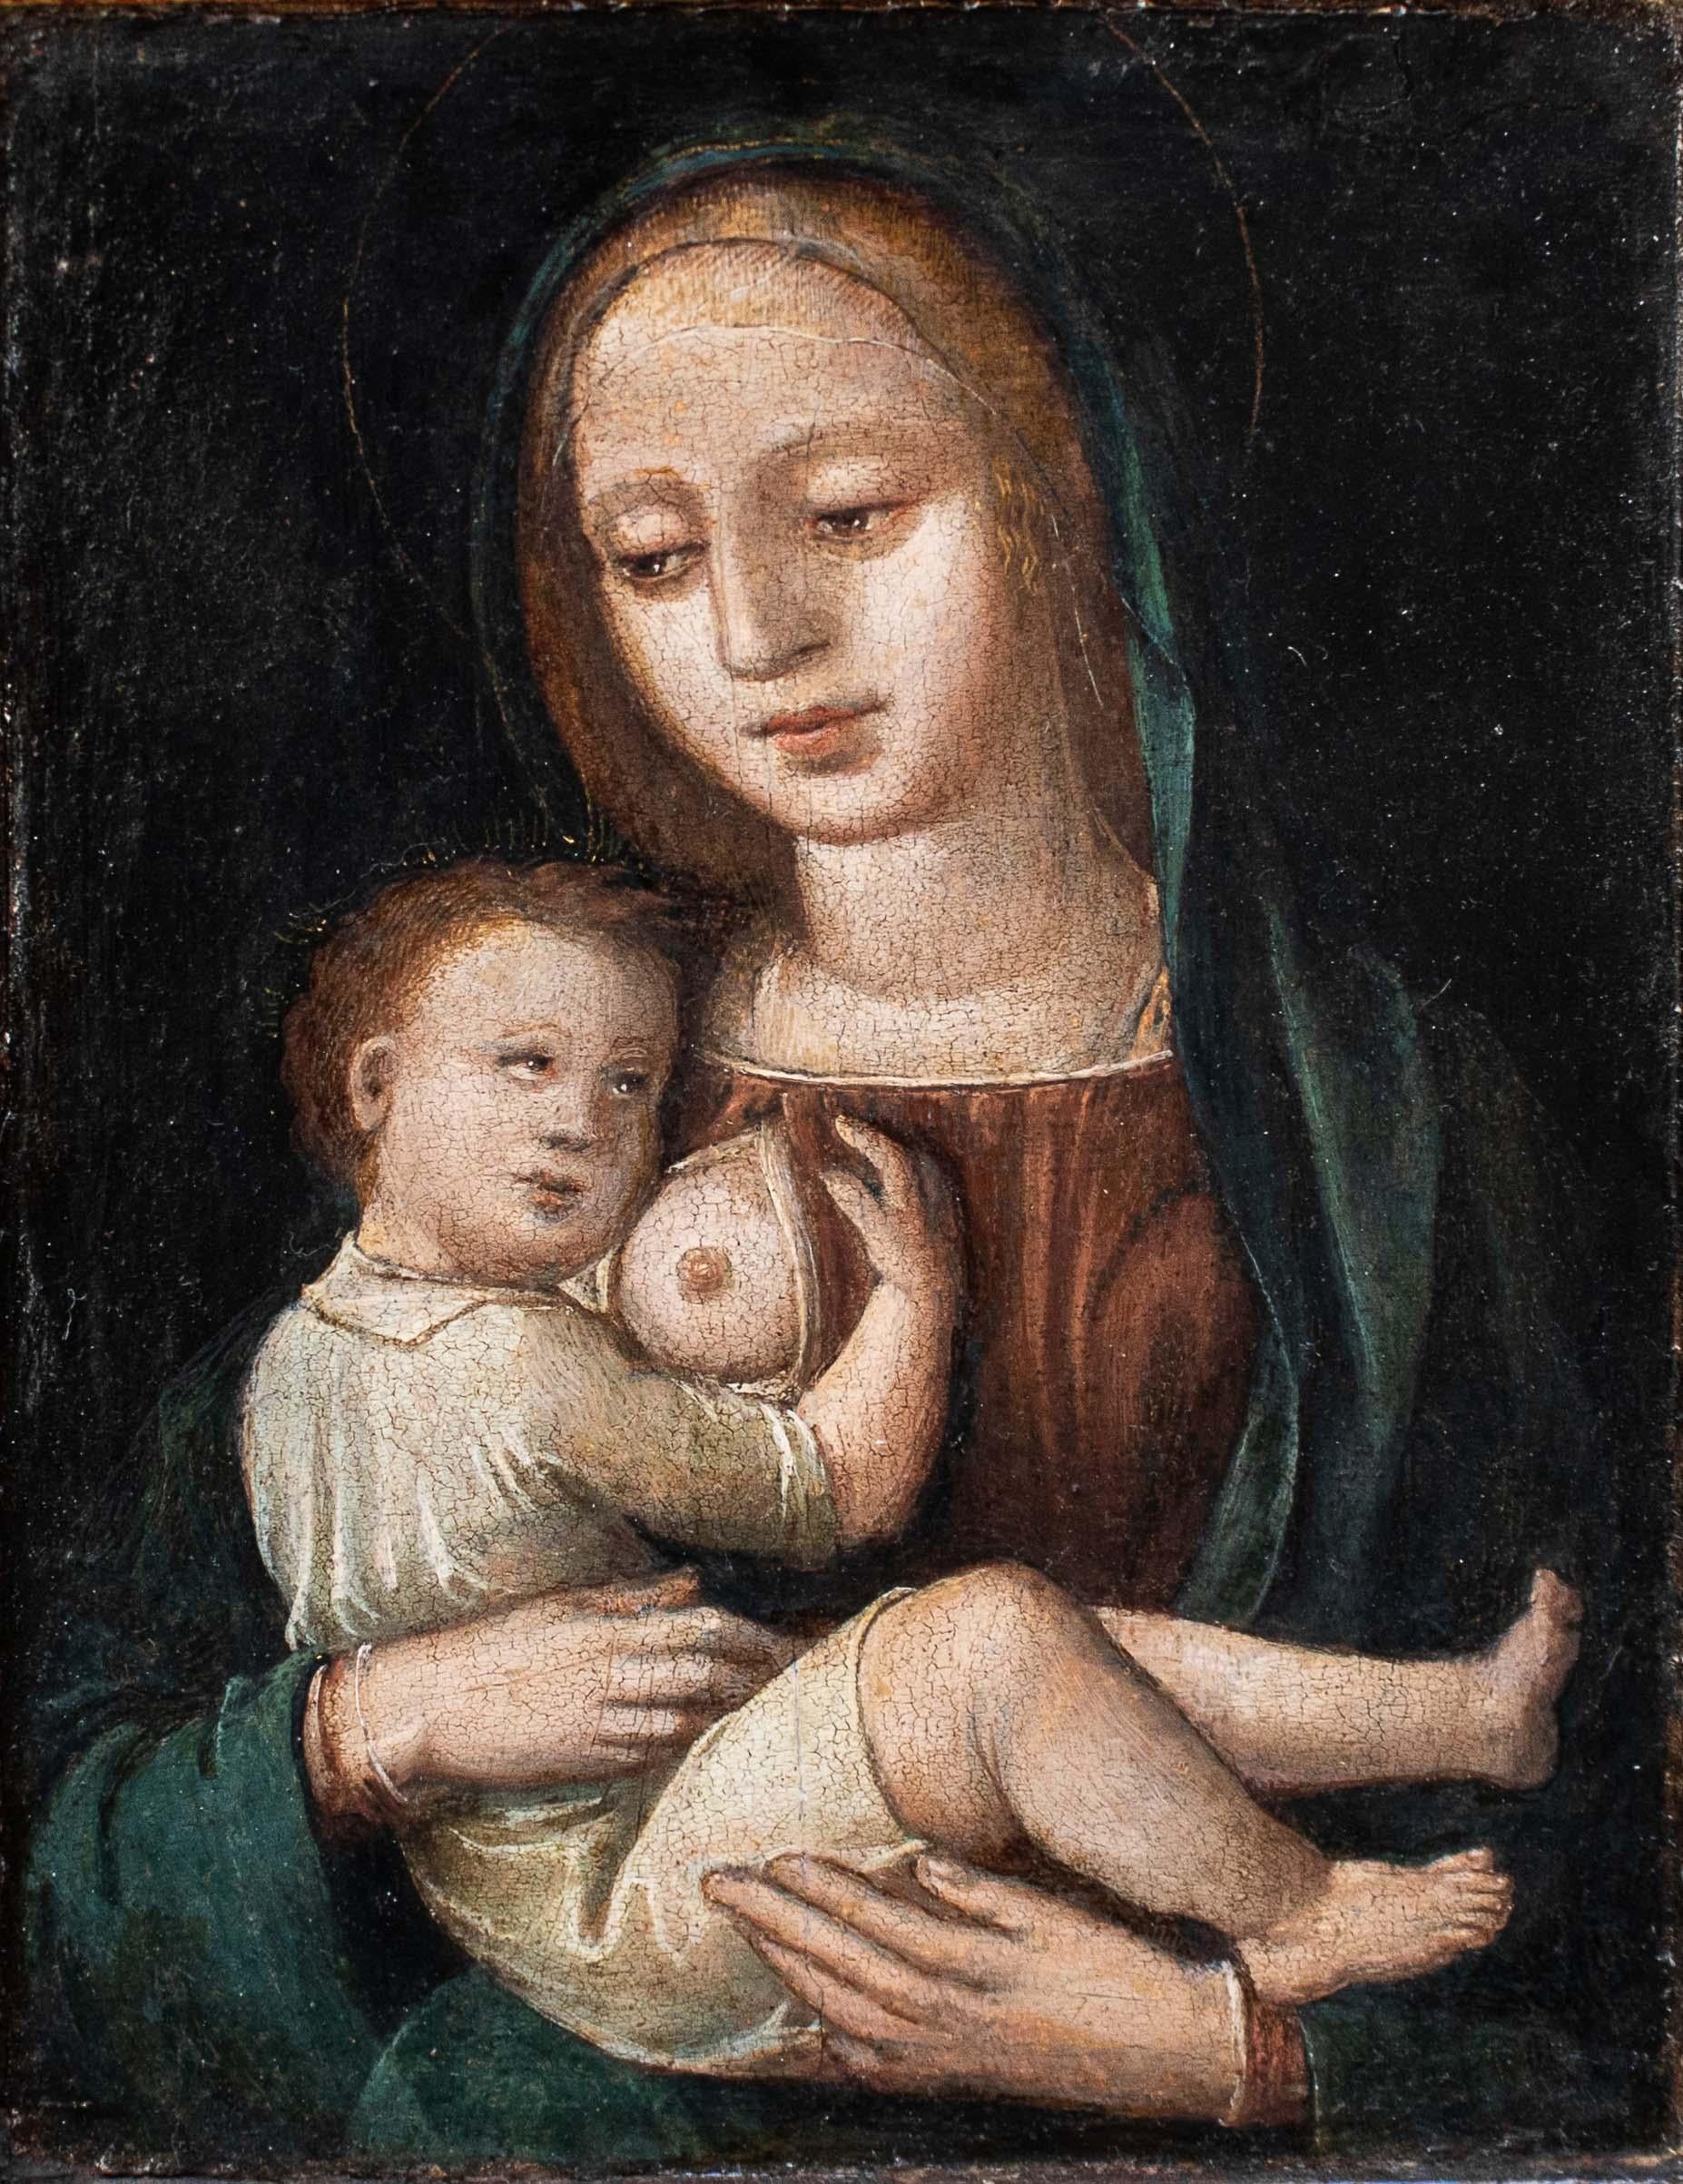 17th century
Madonna of the milk
Oil on panel, 27 x 20 cm - with frame 32.5 x 26 cm

The subject of the work in question is particularly fascinating for its sweetness and refinement. In fact, it represents the so-called iconography of the Virgo